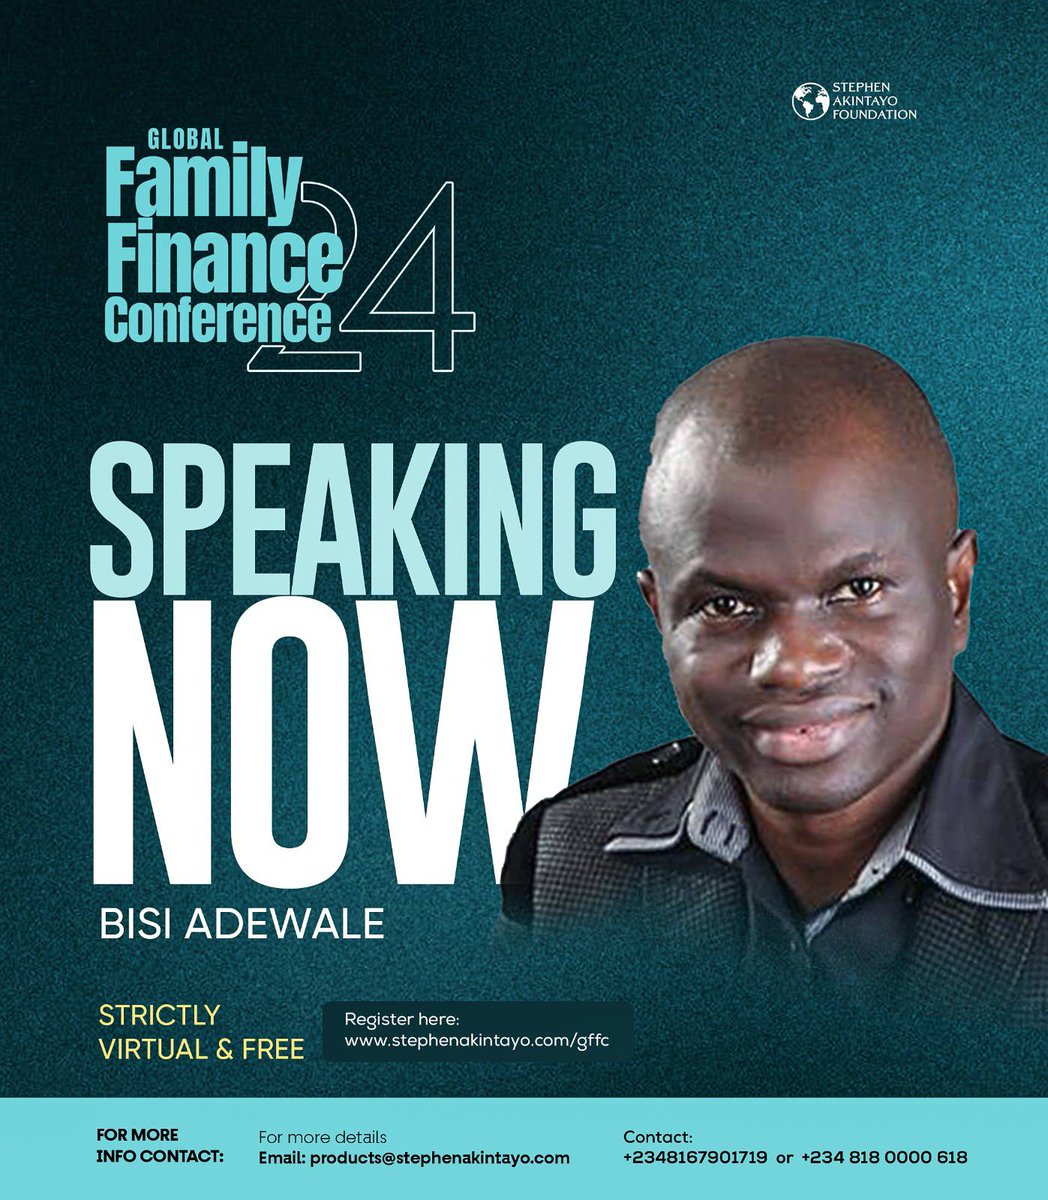 Speaking now is Bisi Adewale, on 'Money Management in the Family.'🔥

You cannot afford to miss this one!

Join now at stephenakintayo.com/gffc

For more enquiries, contact +234 818 0000 618 or +234 816 790 1719.

#drsakintayo #GFFC2024 #GFFC #Familyfinance #day4